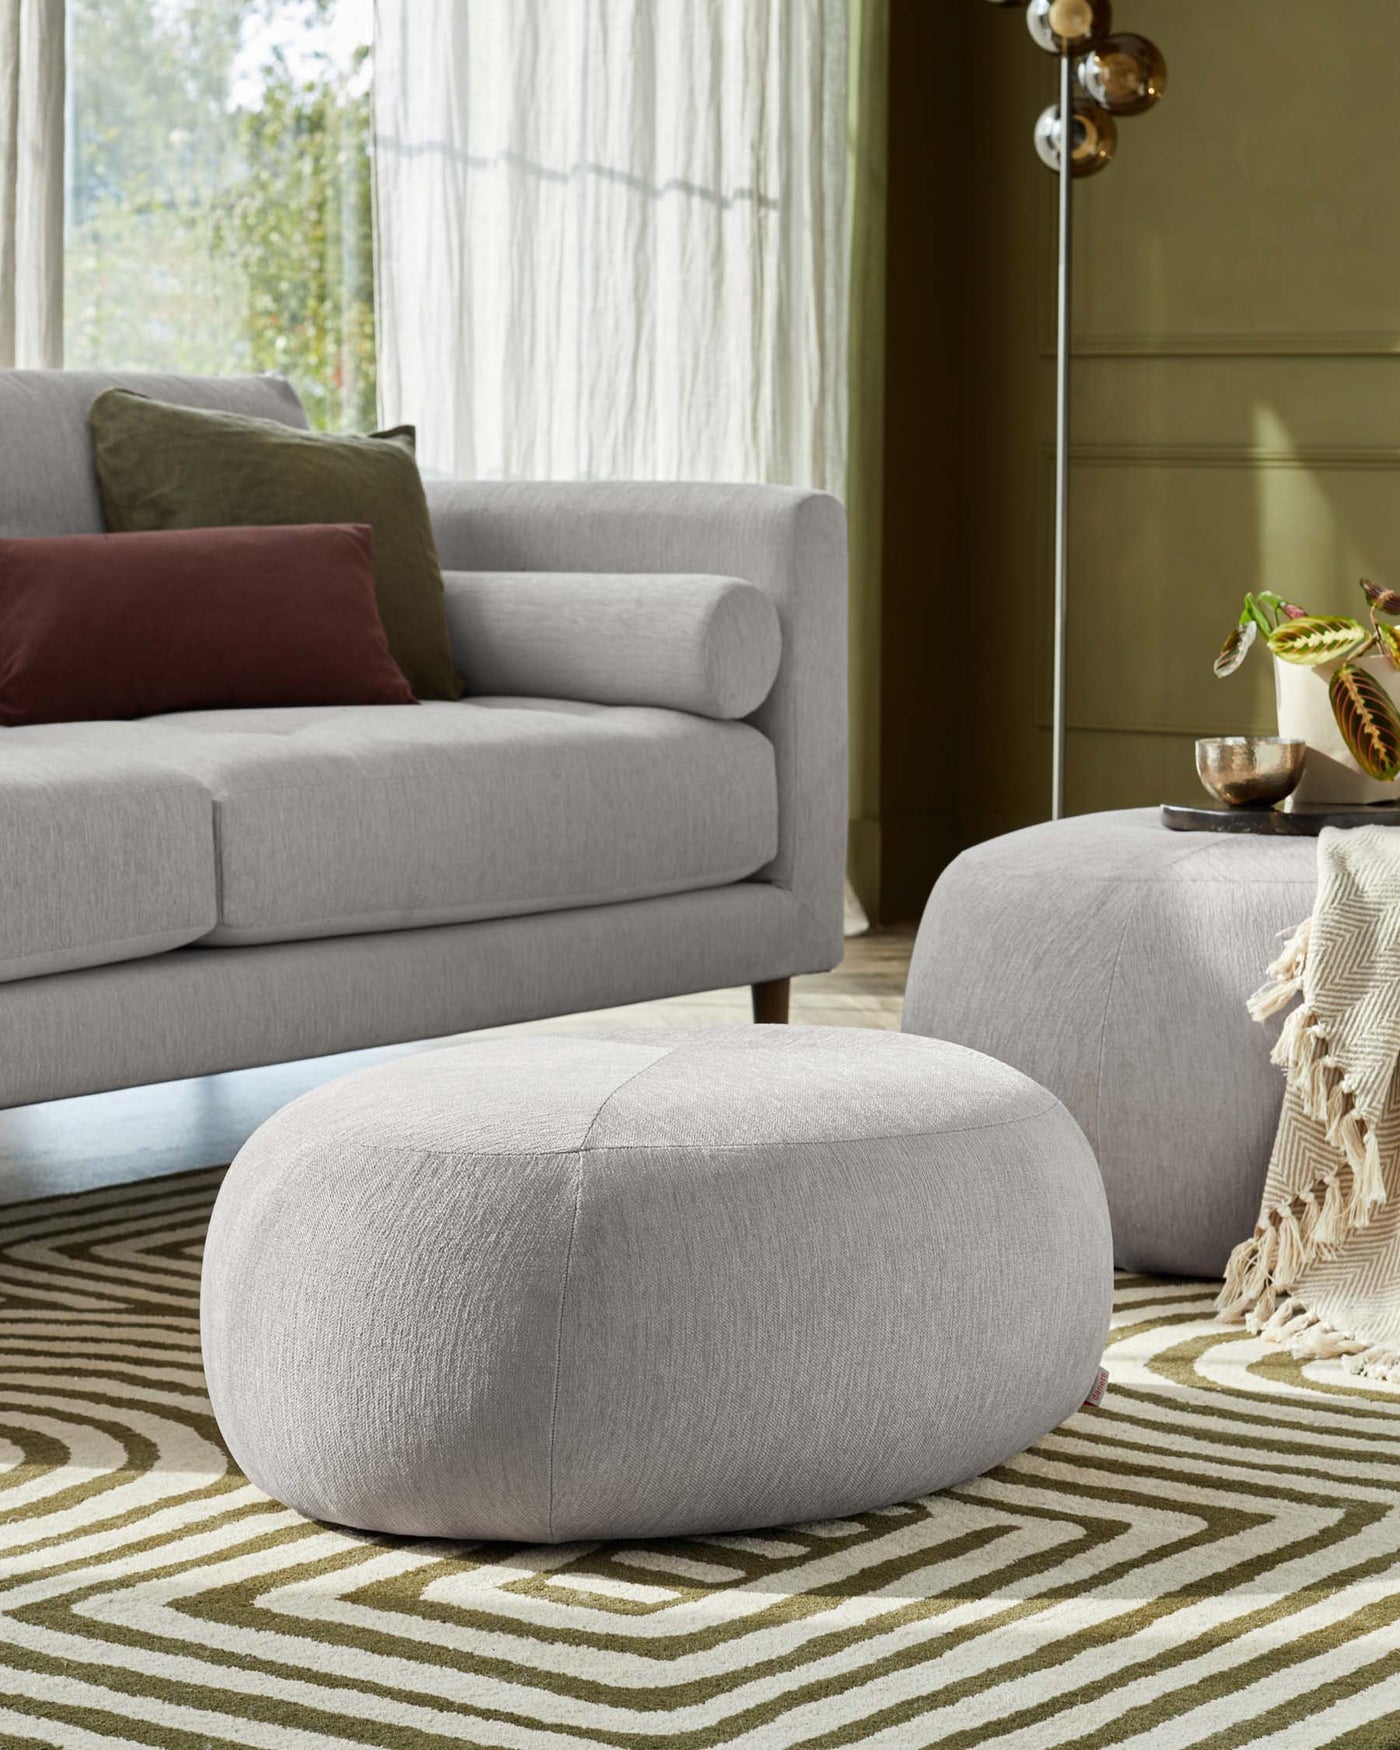 A modern light grey upholstered sofa with clean lines and cylindrical cushions on the sides. In front of the sofa are two round grey fabric ottomans with a subtle textural design. The furniture is displayed in a room with natural light, a geometric-patterned rug on the floor, and a hint of a metallic floor lamp in the background.